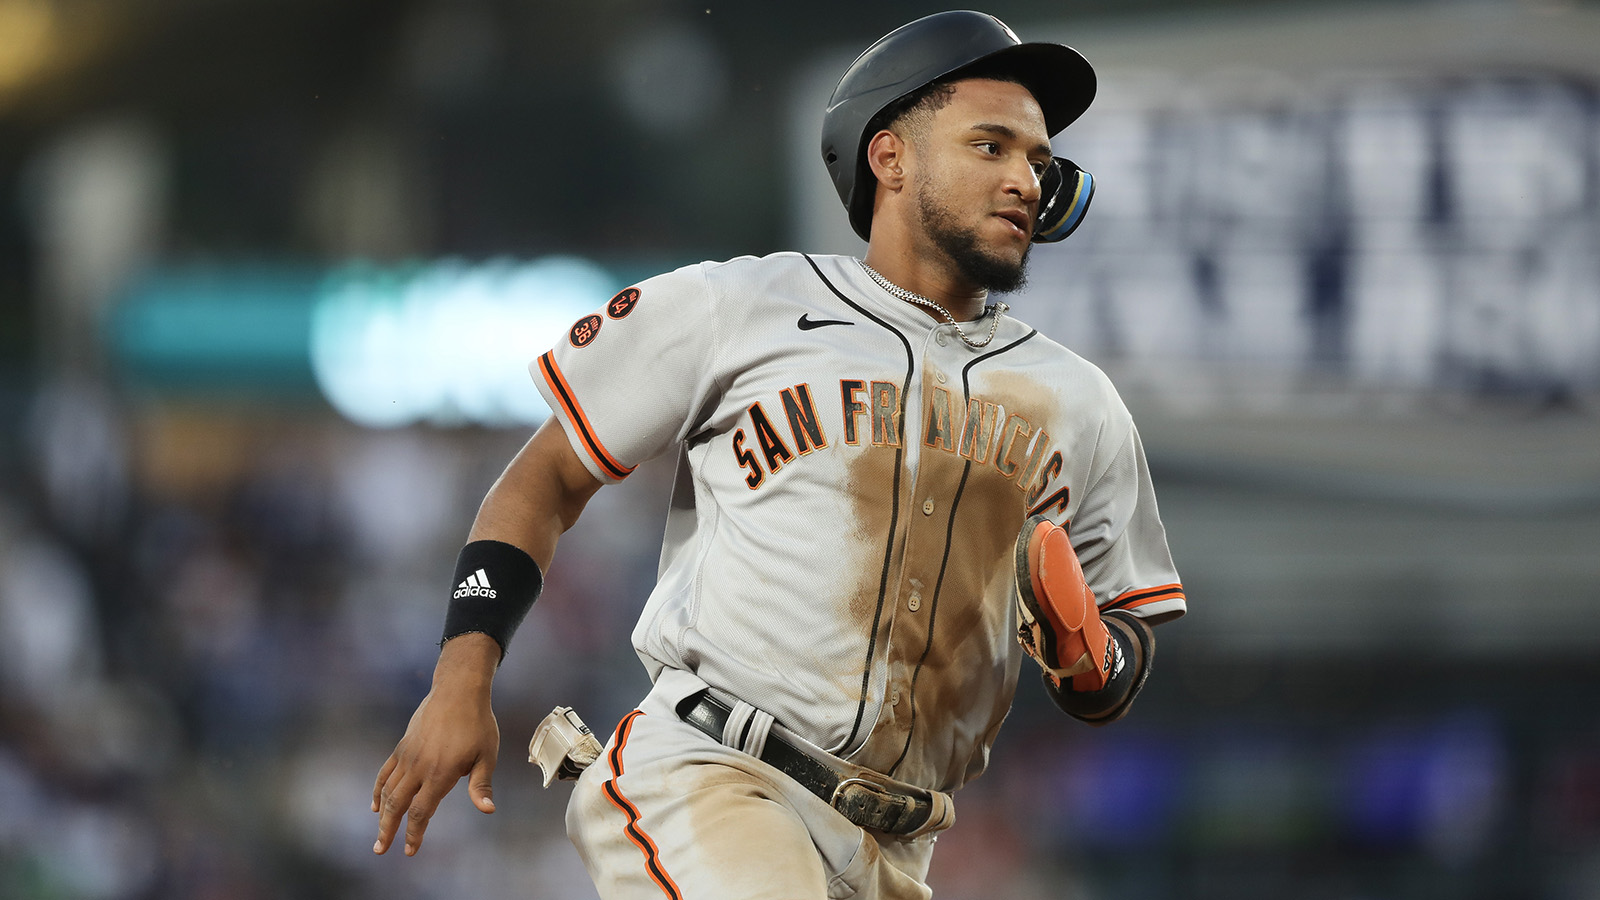 Giants finish off rare sweep of Dodgers in Los Angeles with 7-3